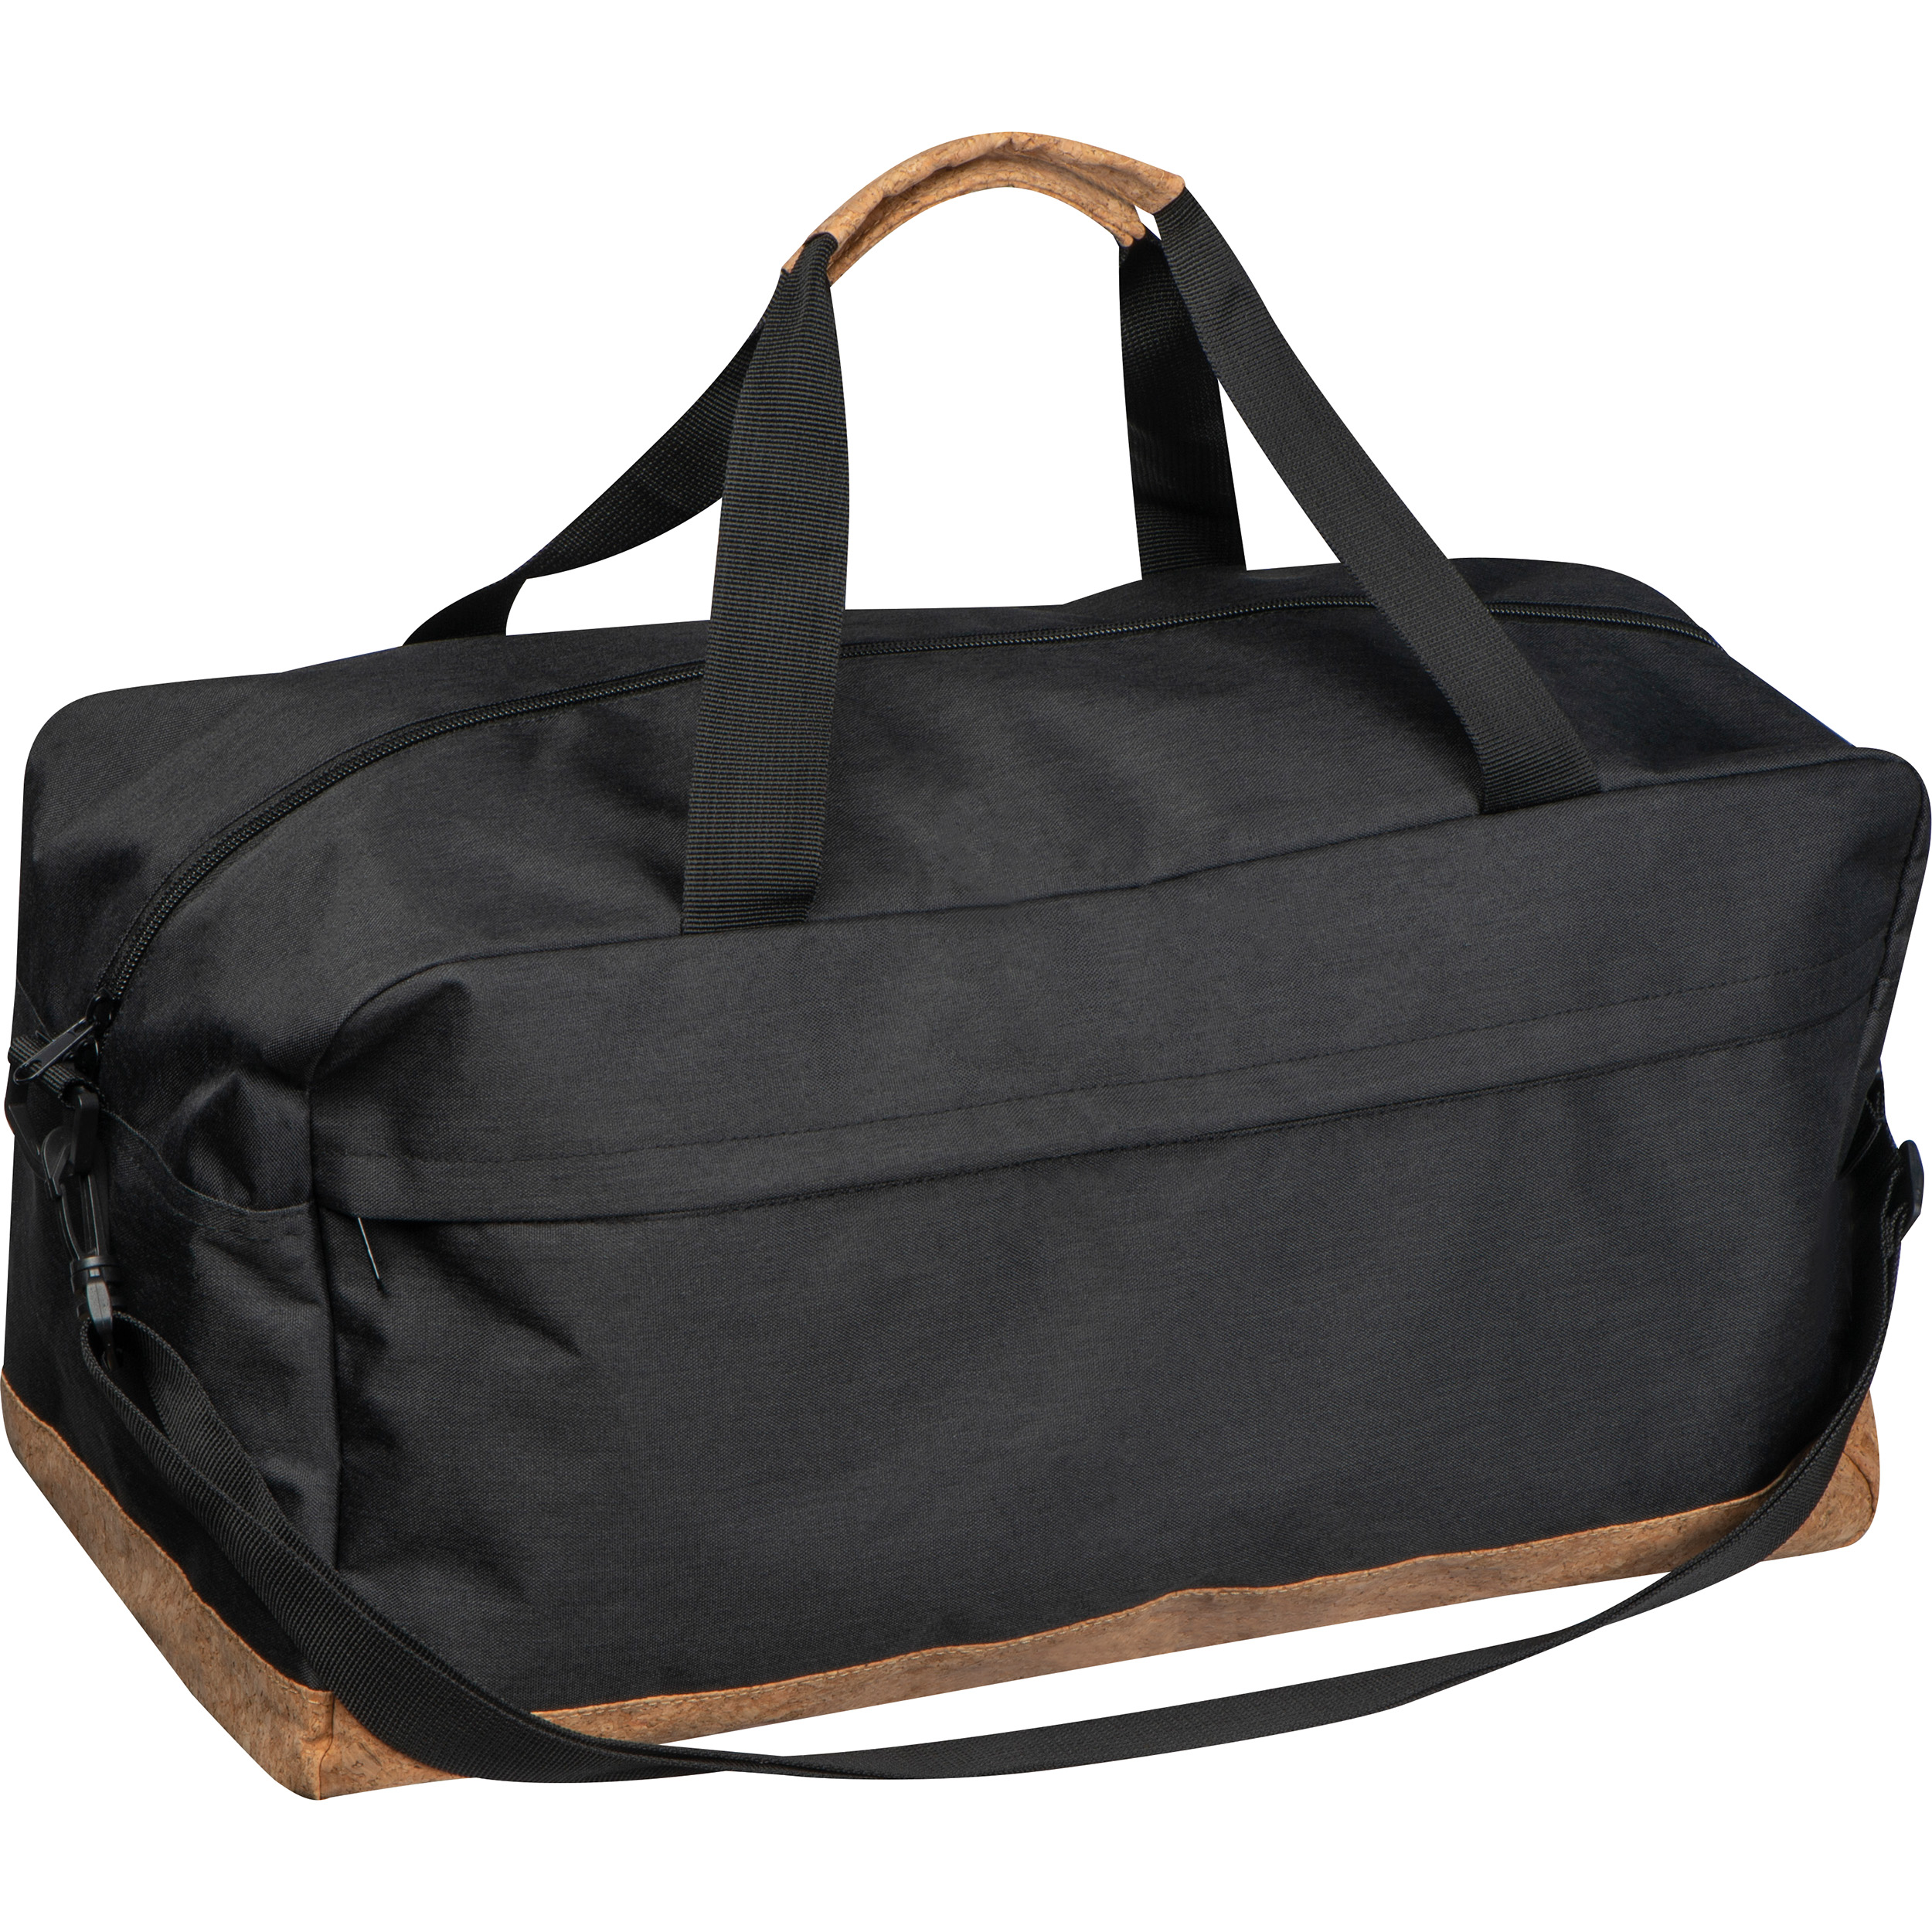 RPET sports bag with cork bottom